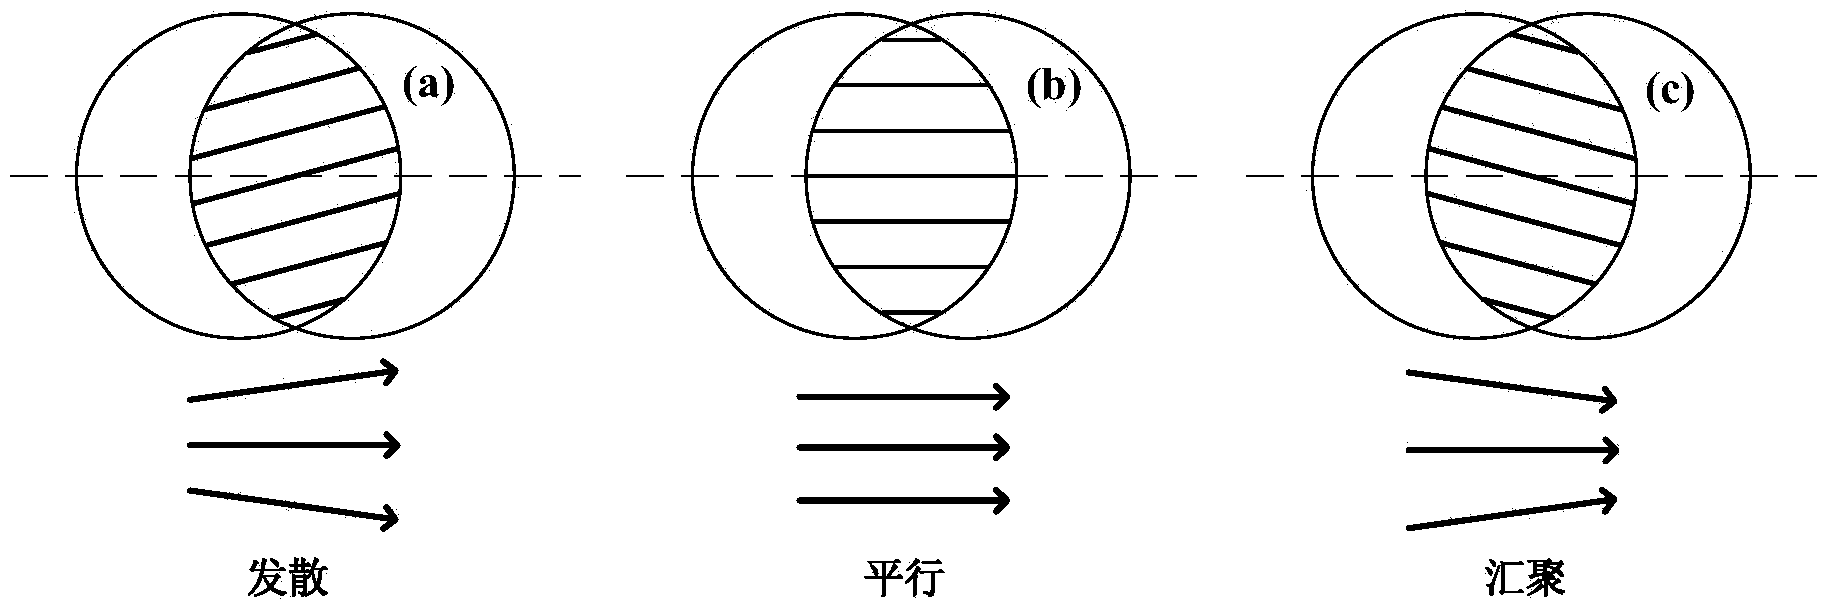 Convex lens focal length measuring device and method